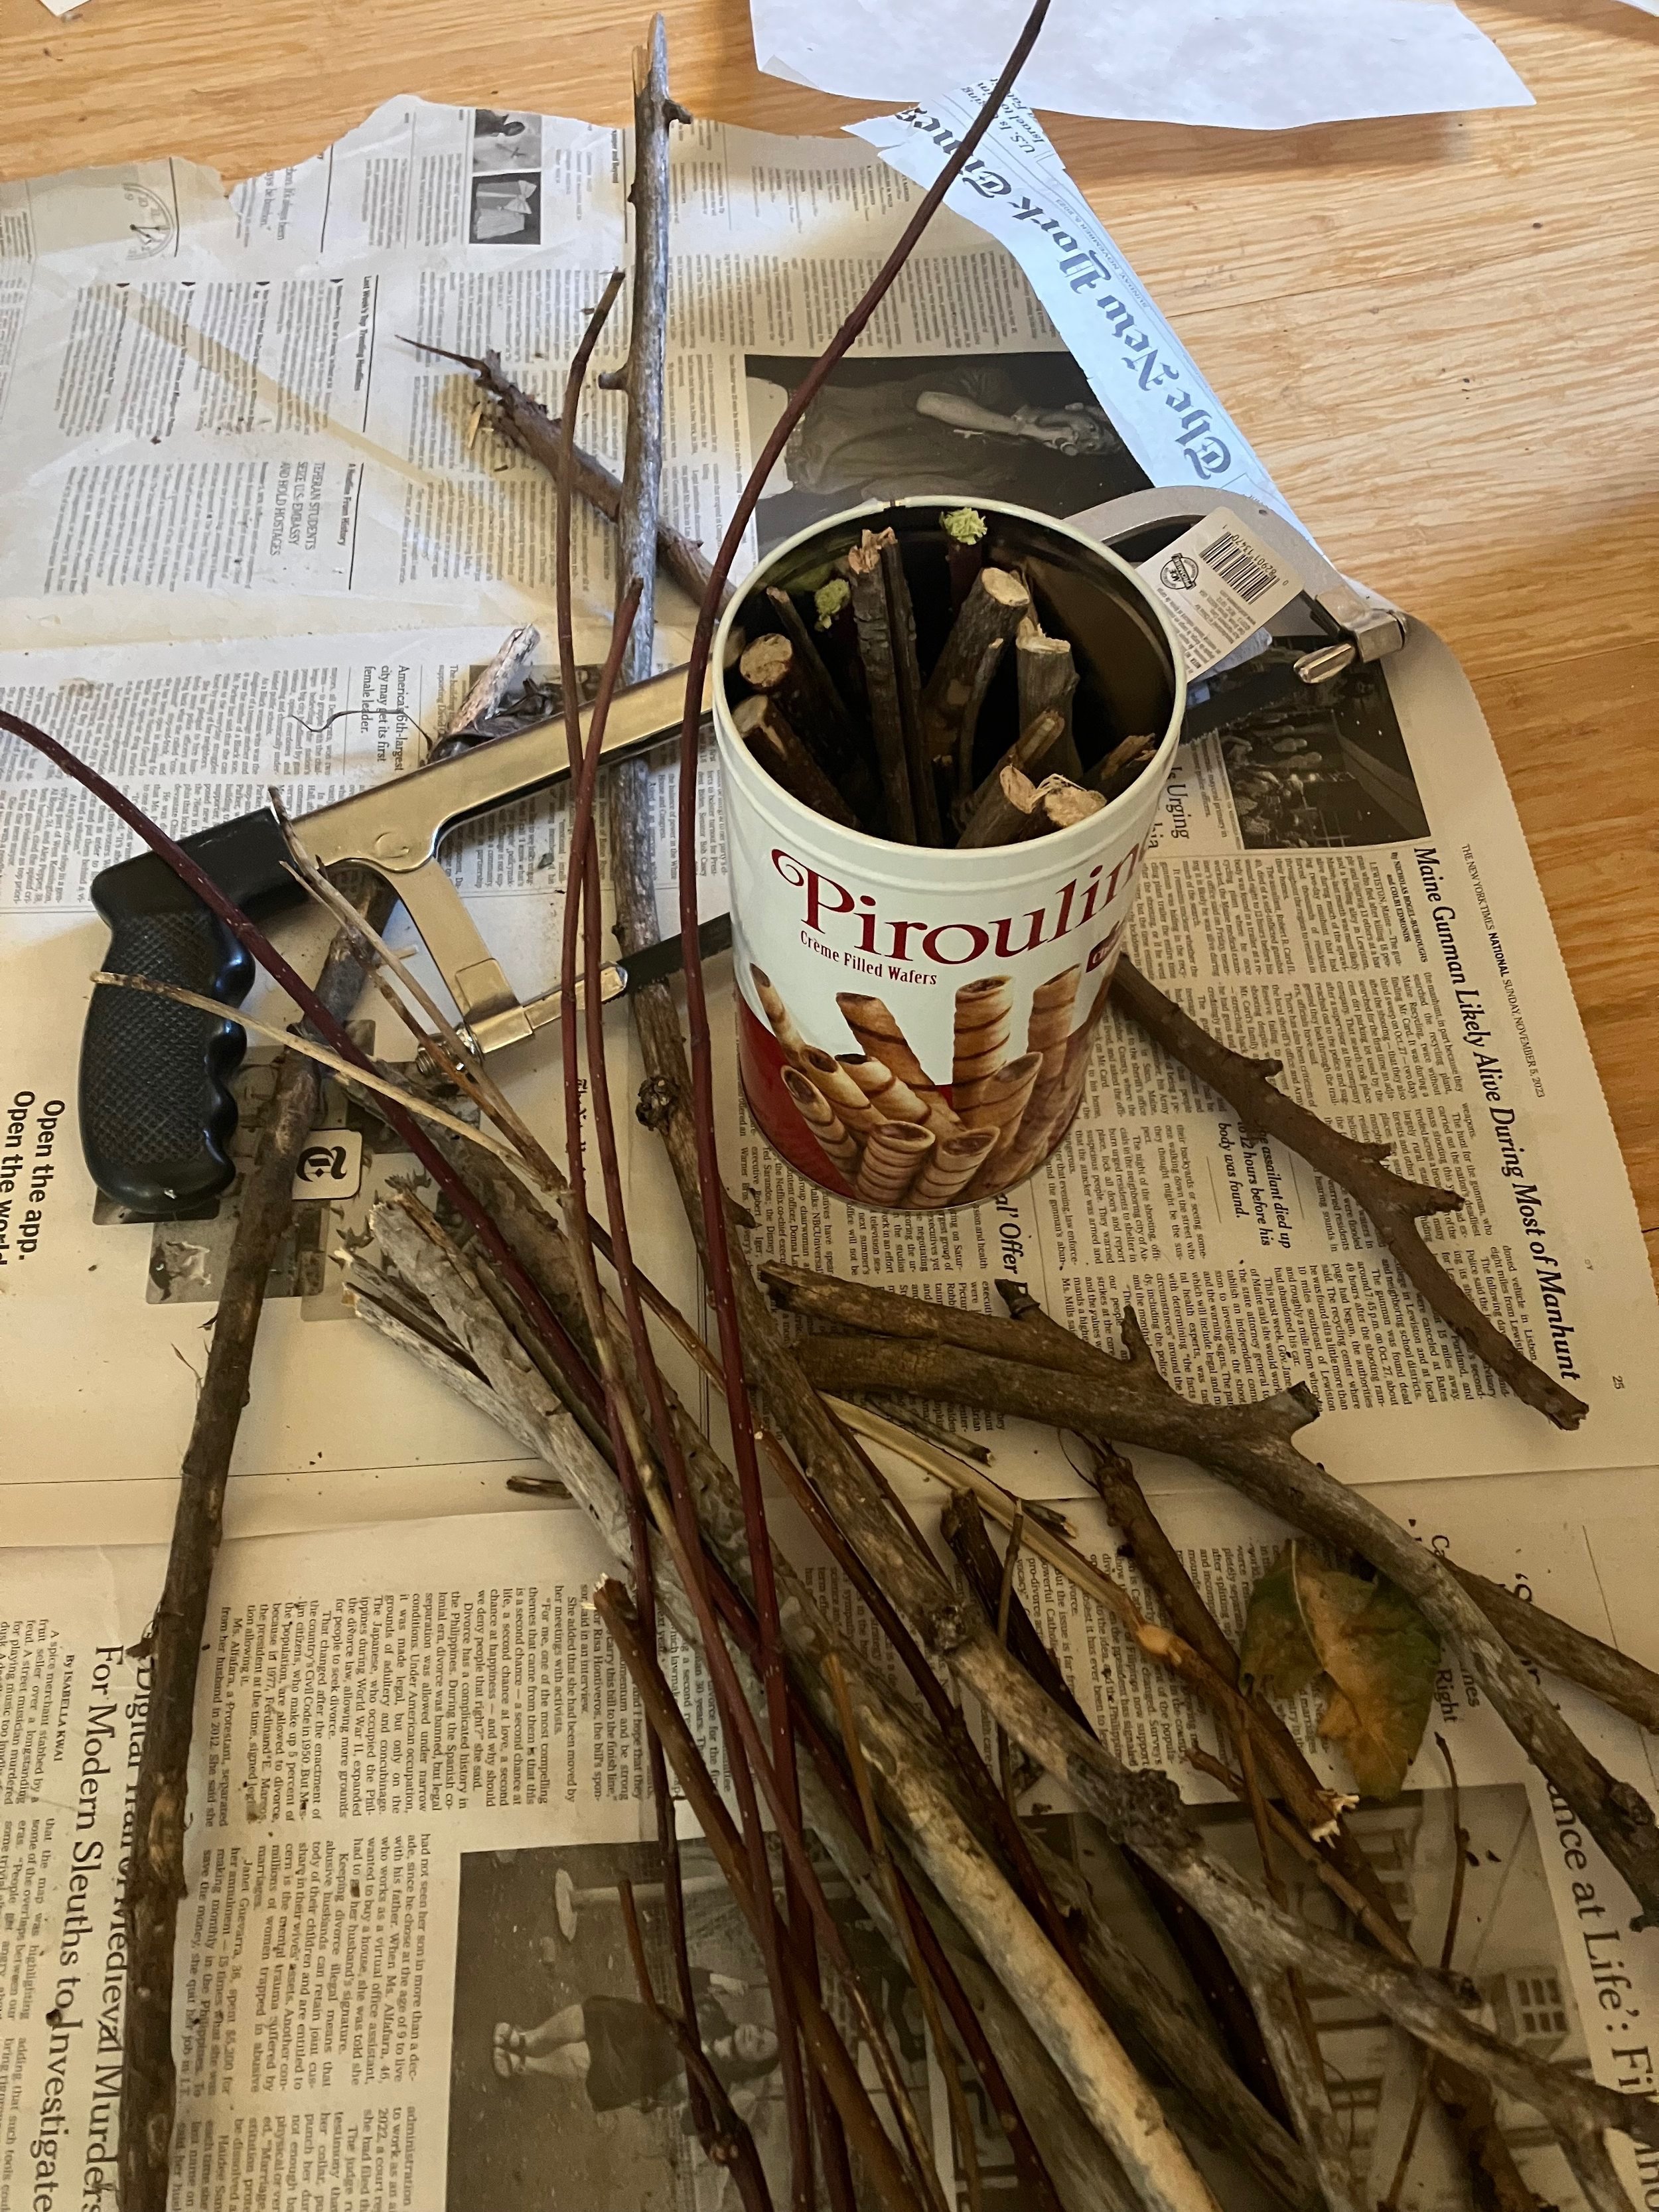  Making my own: Tamarisk branches ready to be charred in a fire pit 